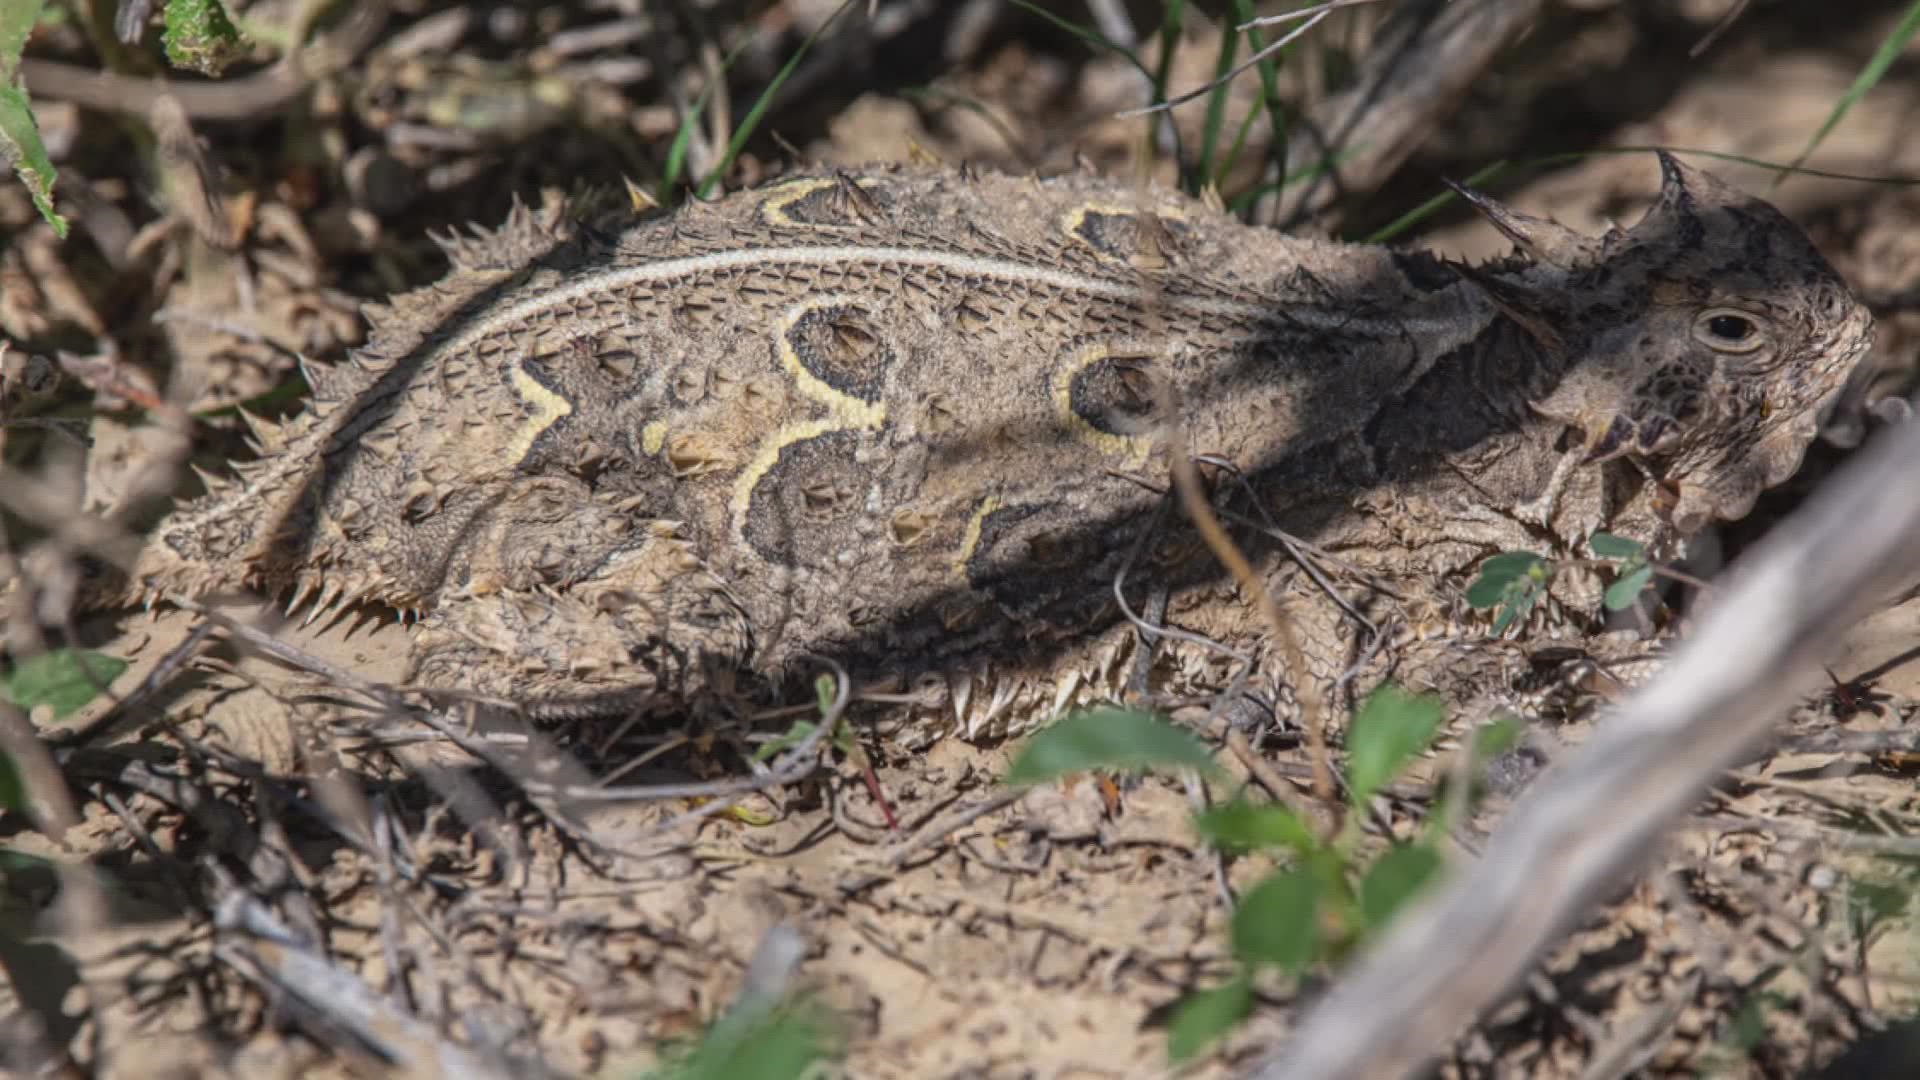 Improving the Horned Lizard population throughout the state involves eliminating this common pest.